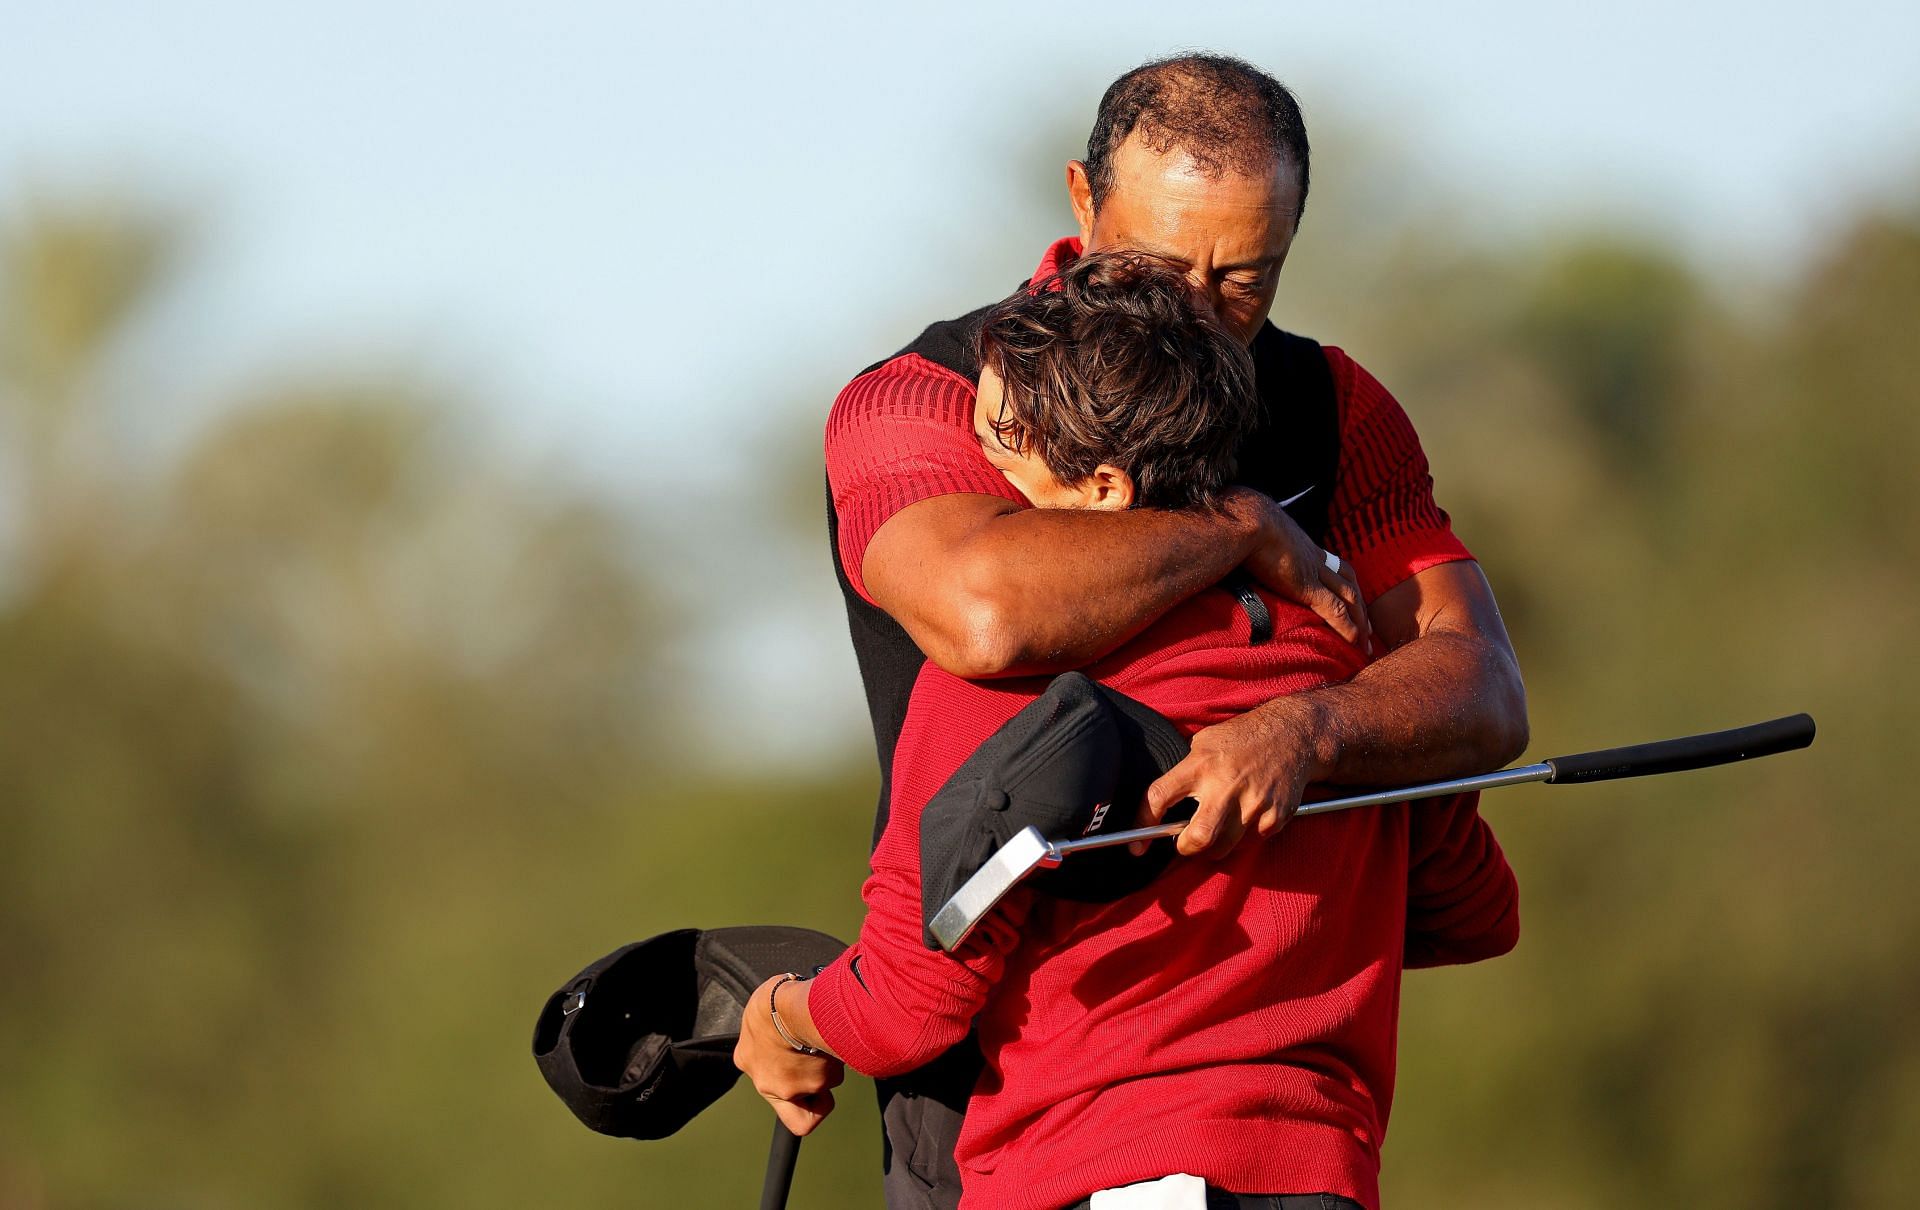 Tiger Woods and Charlie Woods at the PNC Championship - Final Round (Image via Mike Ehrmann/Getty Images)